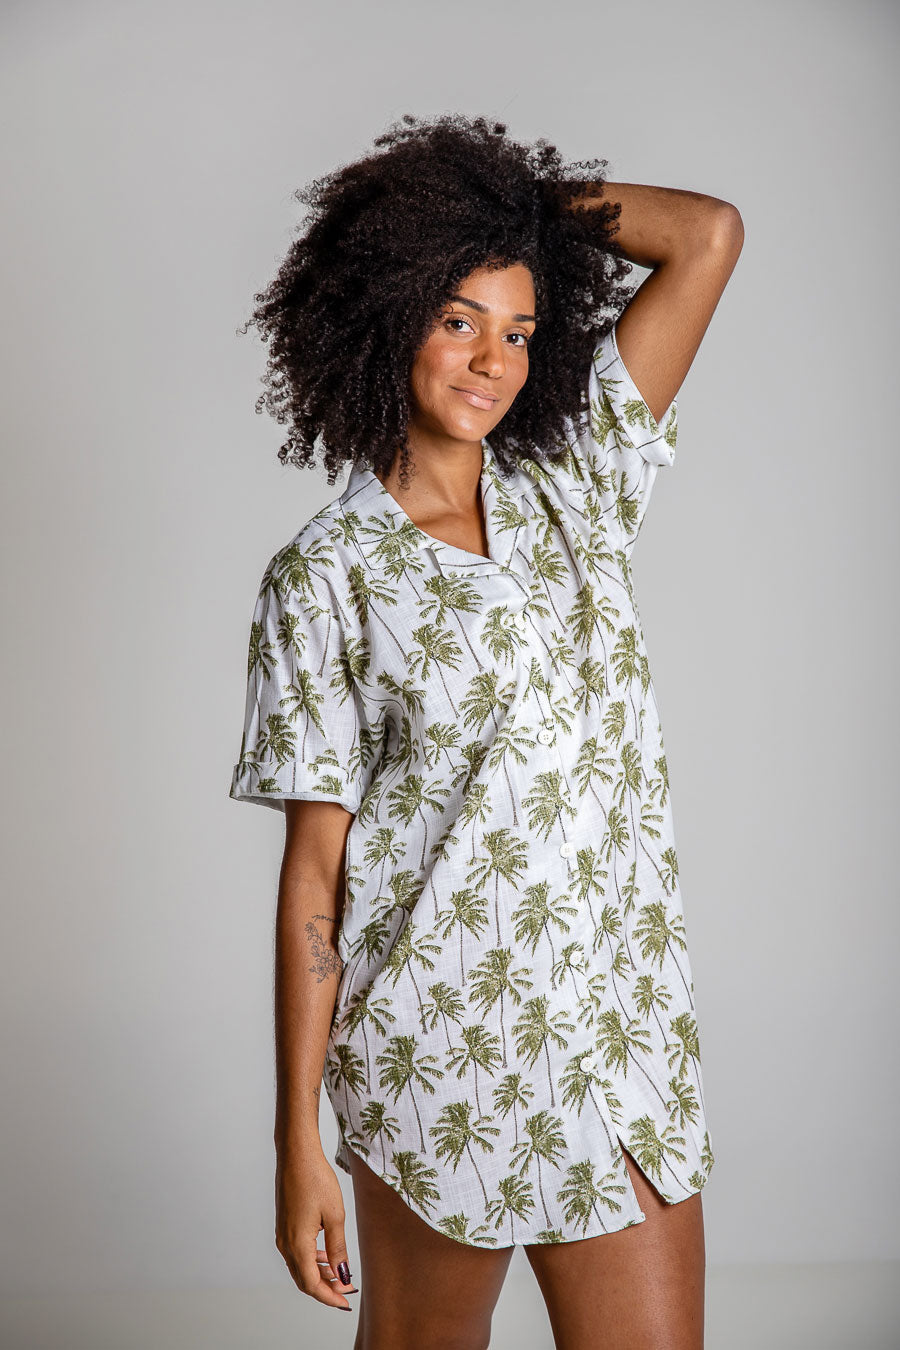 Palm Day by Day Floral Chemise P - M - L 100% Cotton